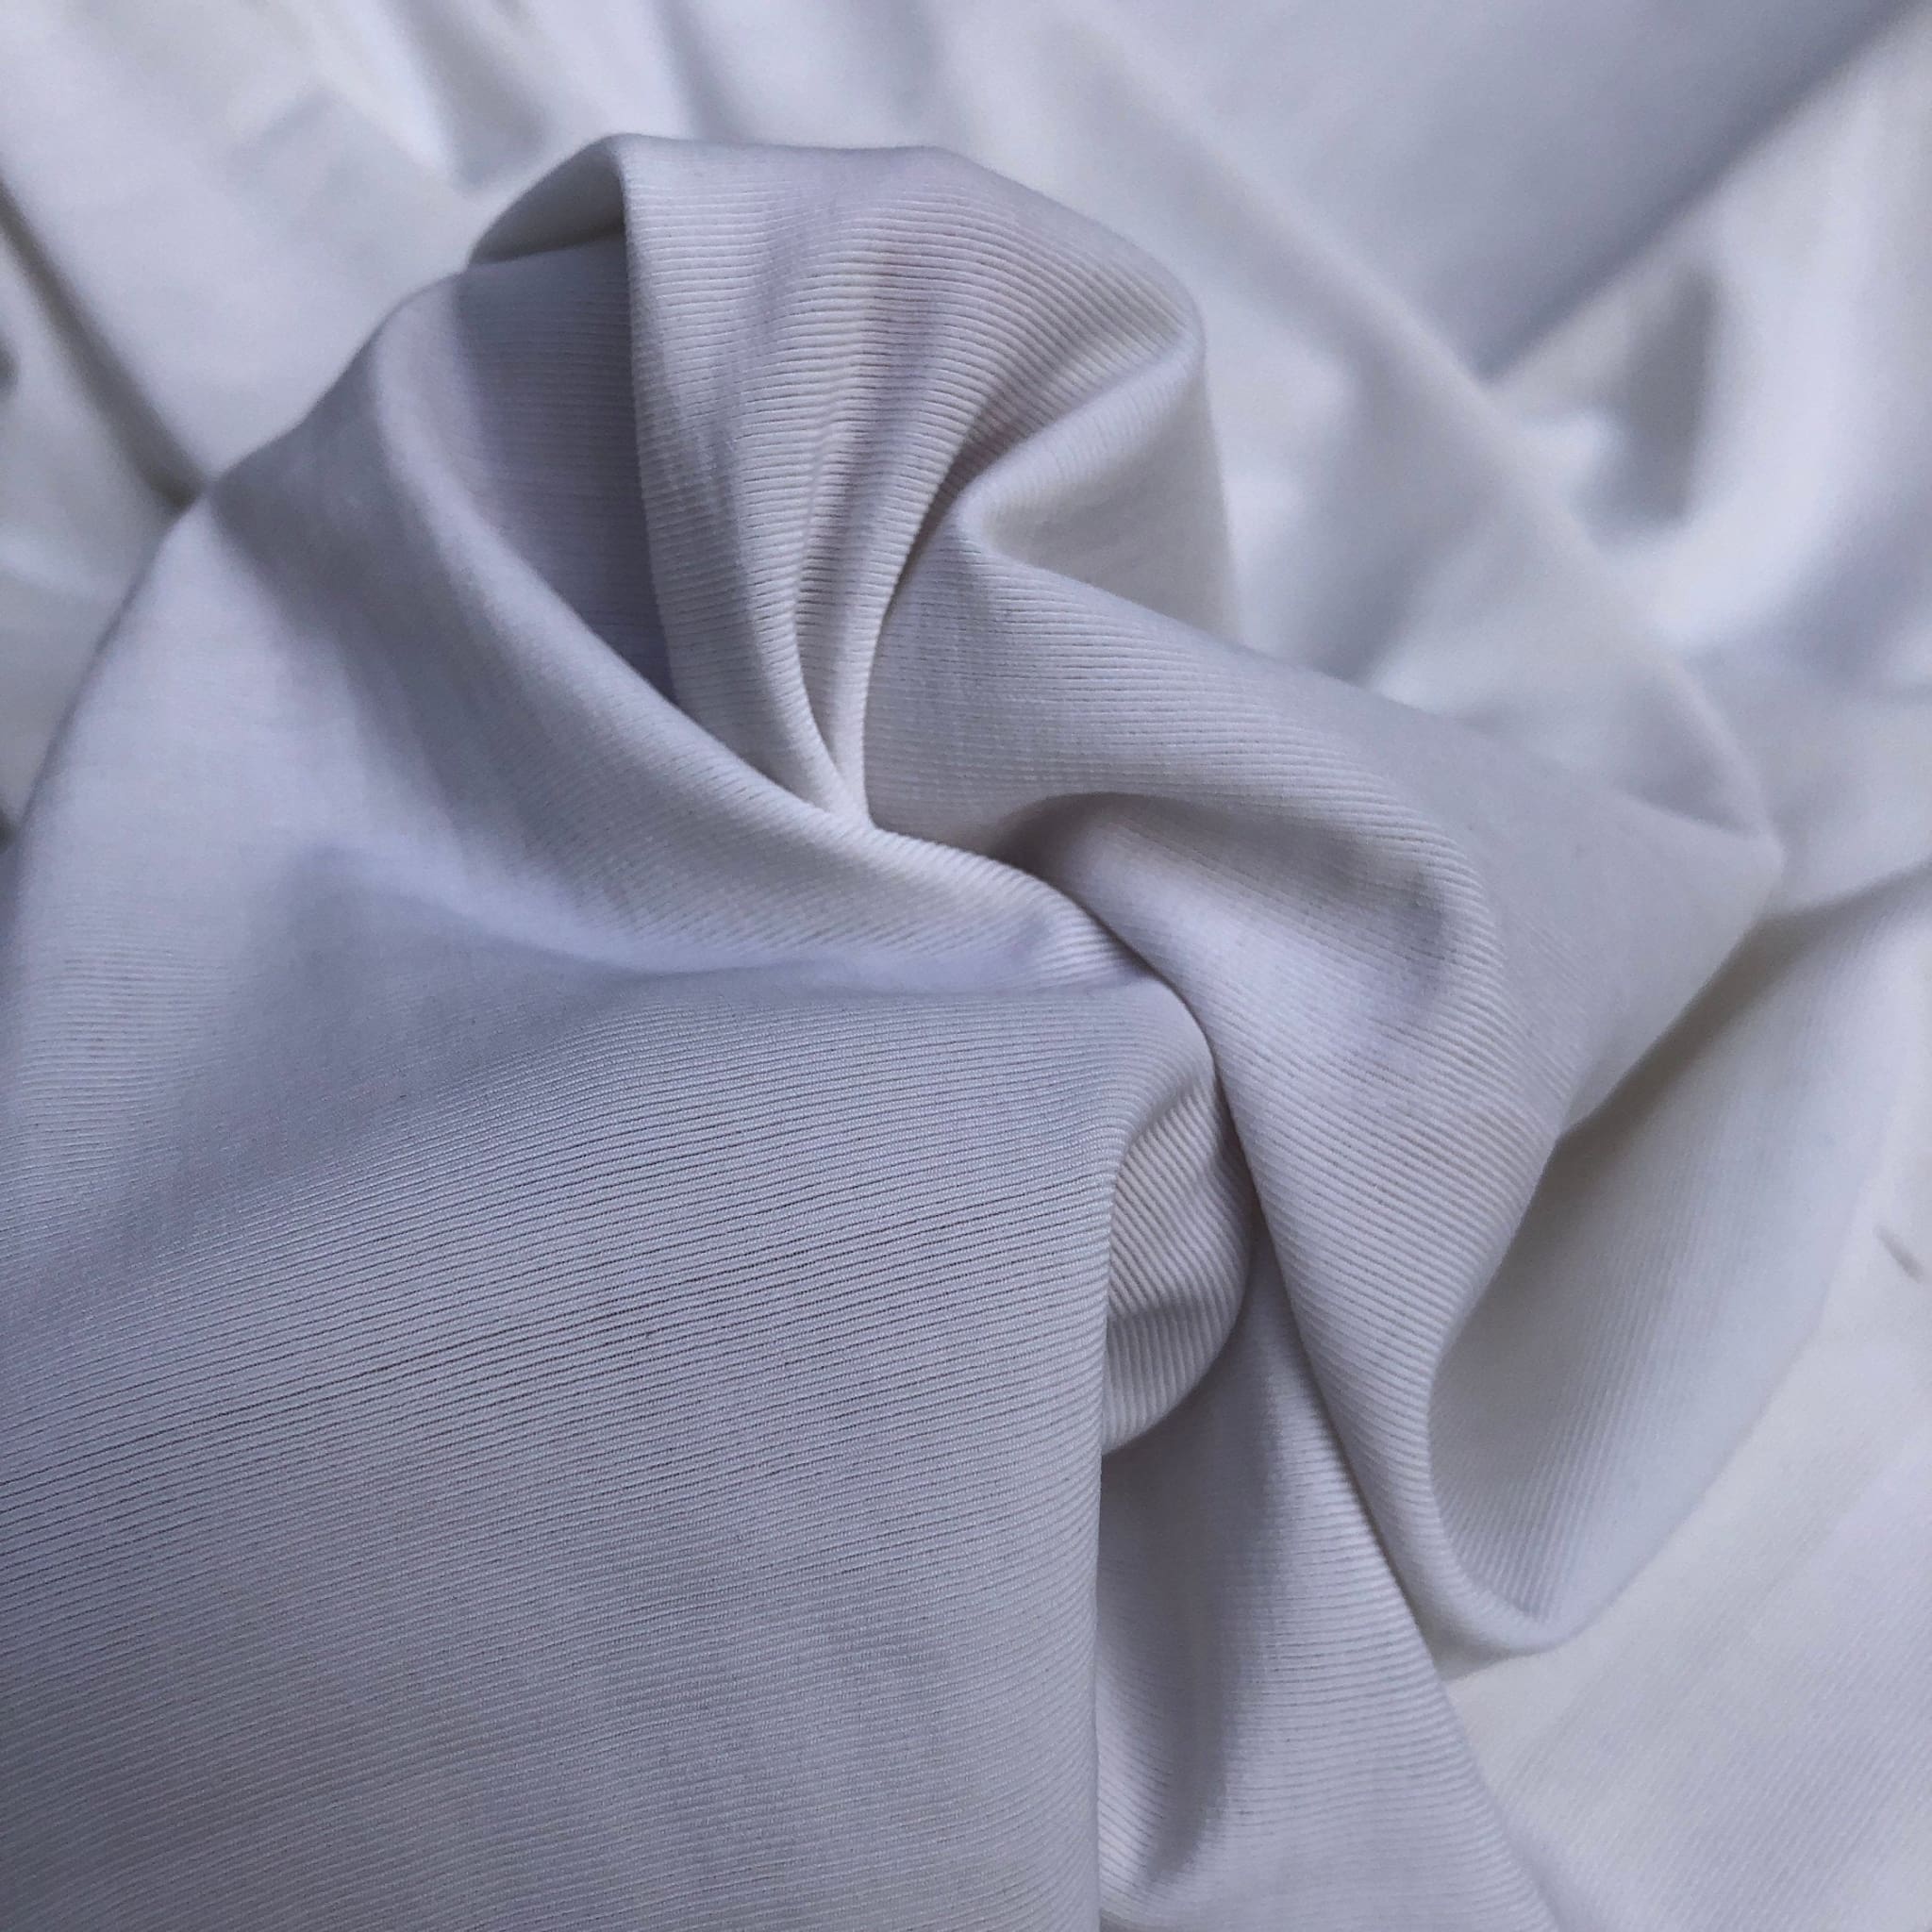 KNIT Fabric: Solid White Cotton Lycra Knit. Sold in 1/2 Yard Increments -   Canada